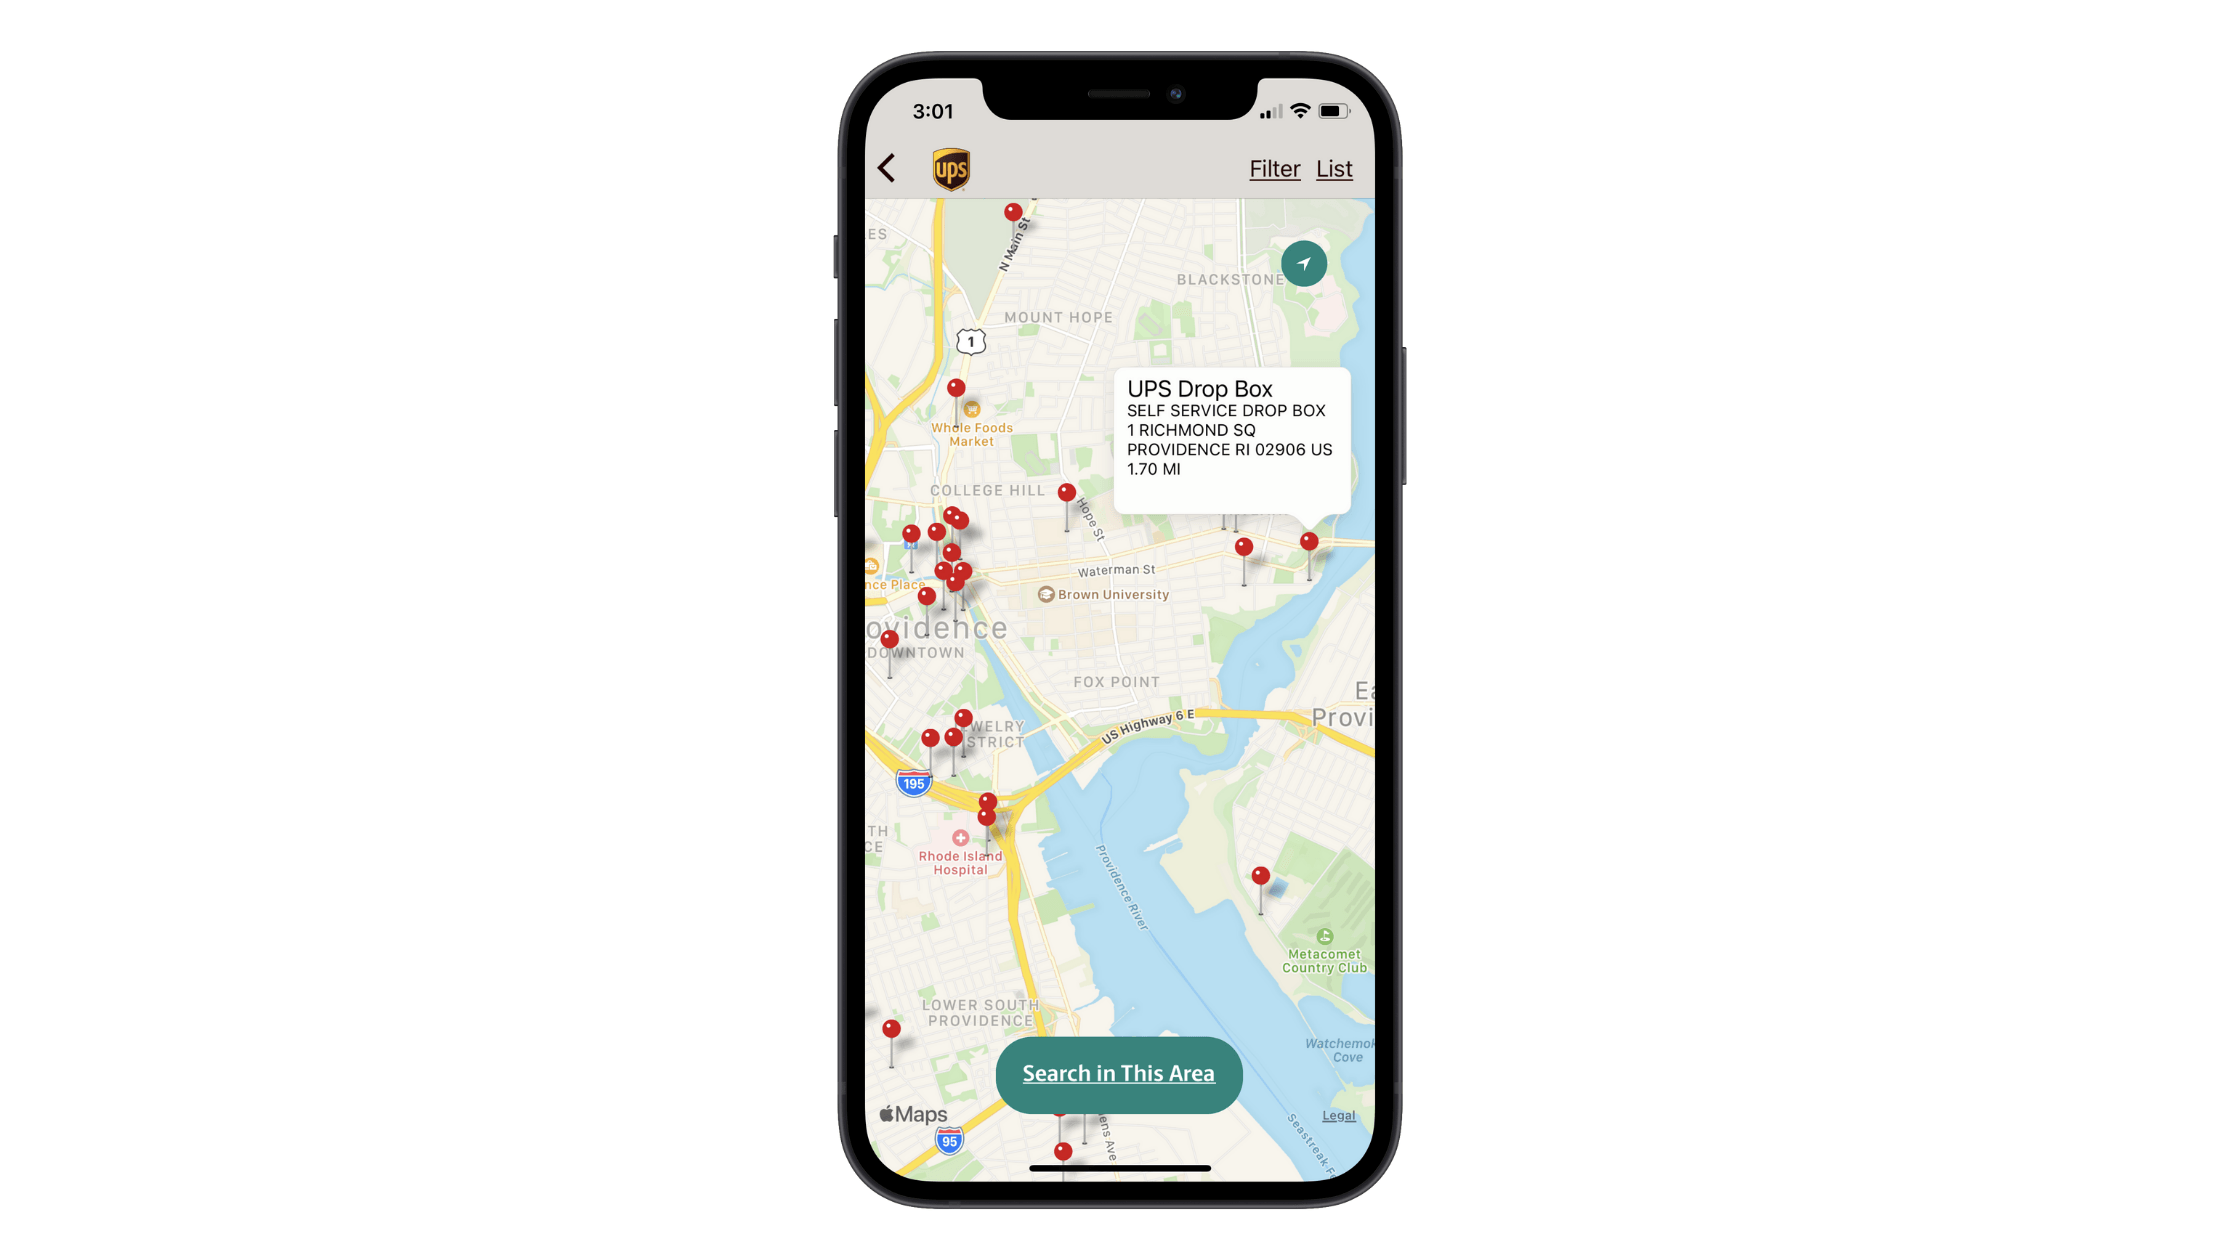 UPS mobile app users can map their location search results. Each of the red pins can be clicked to reveal corresponding information about the type of UPS location, its address, and its distance from the user.